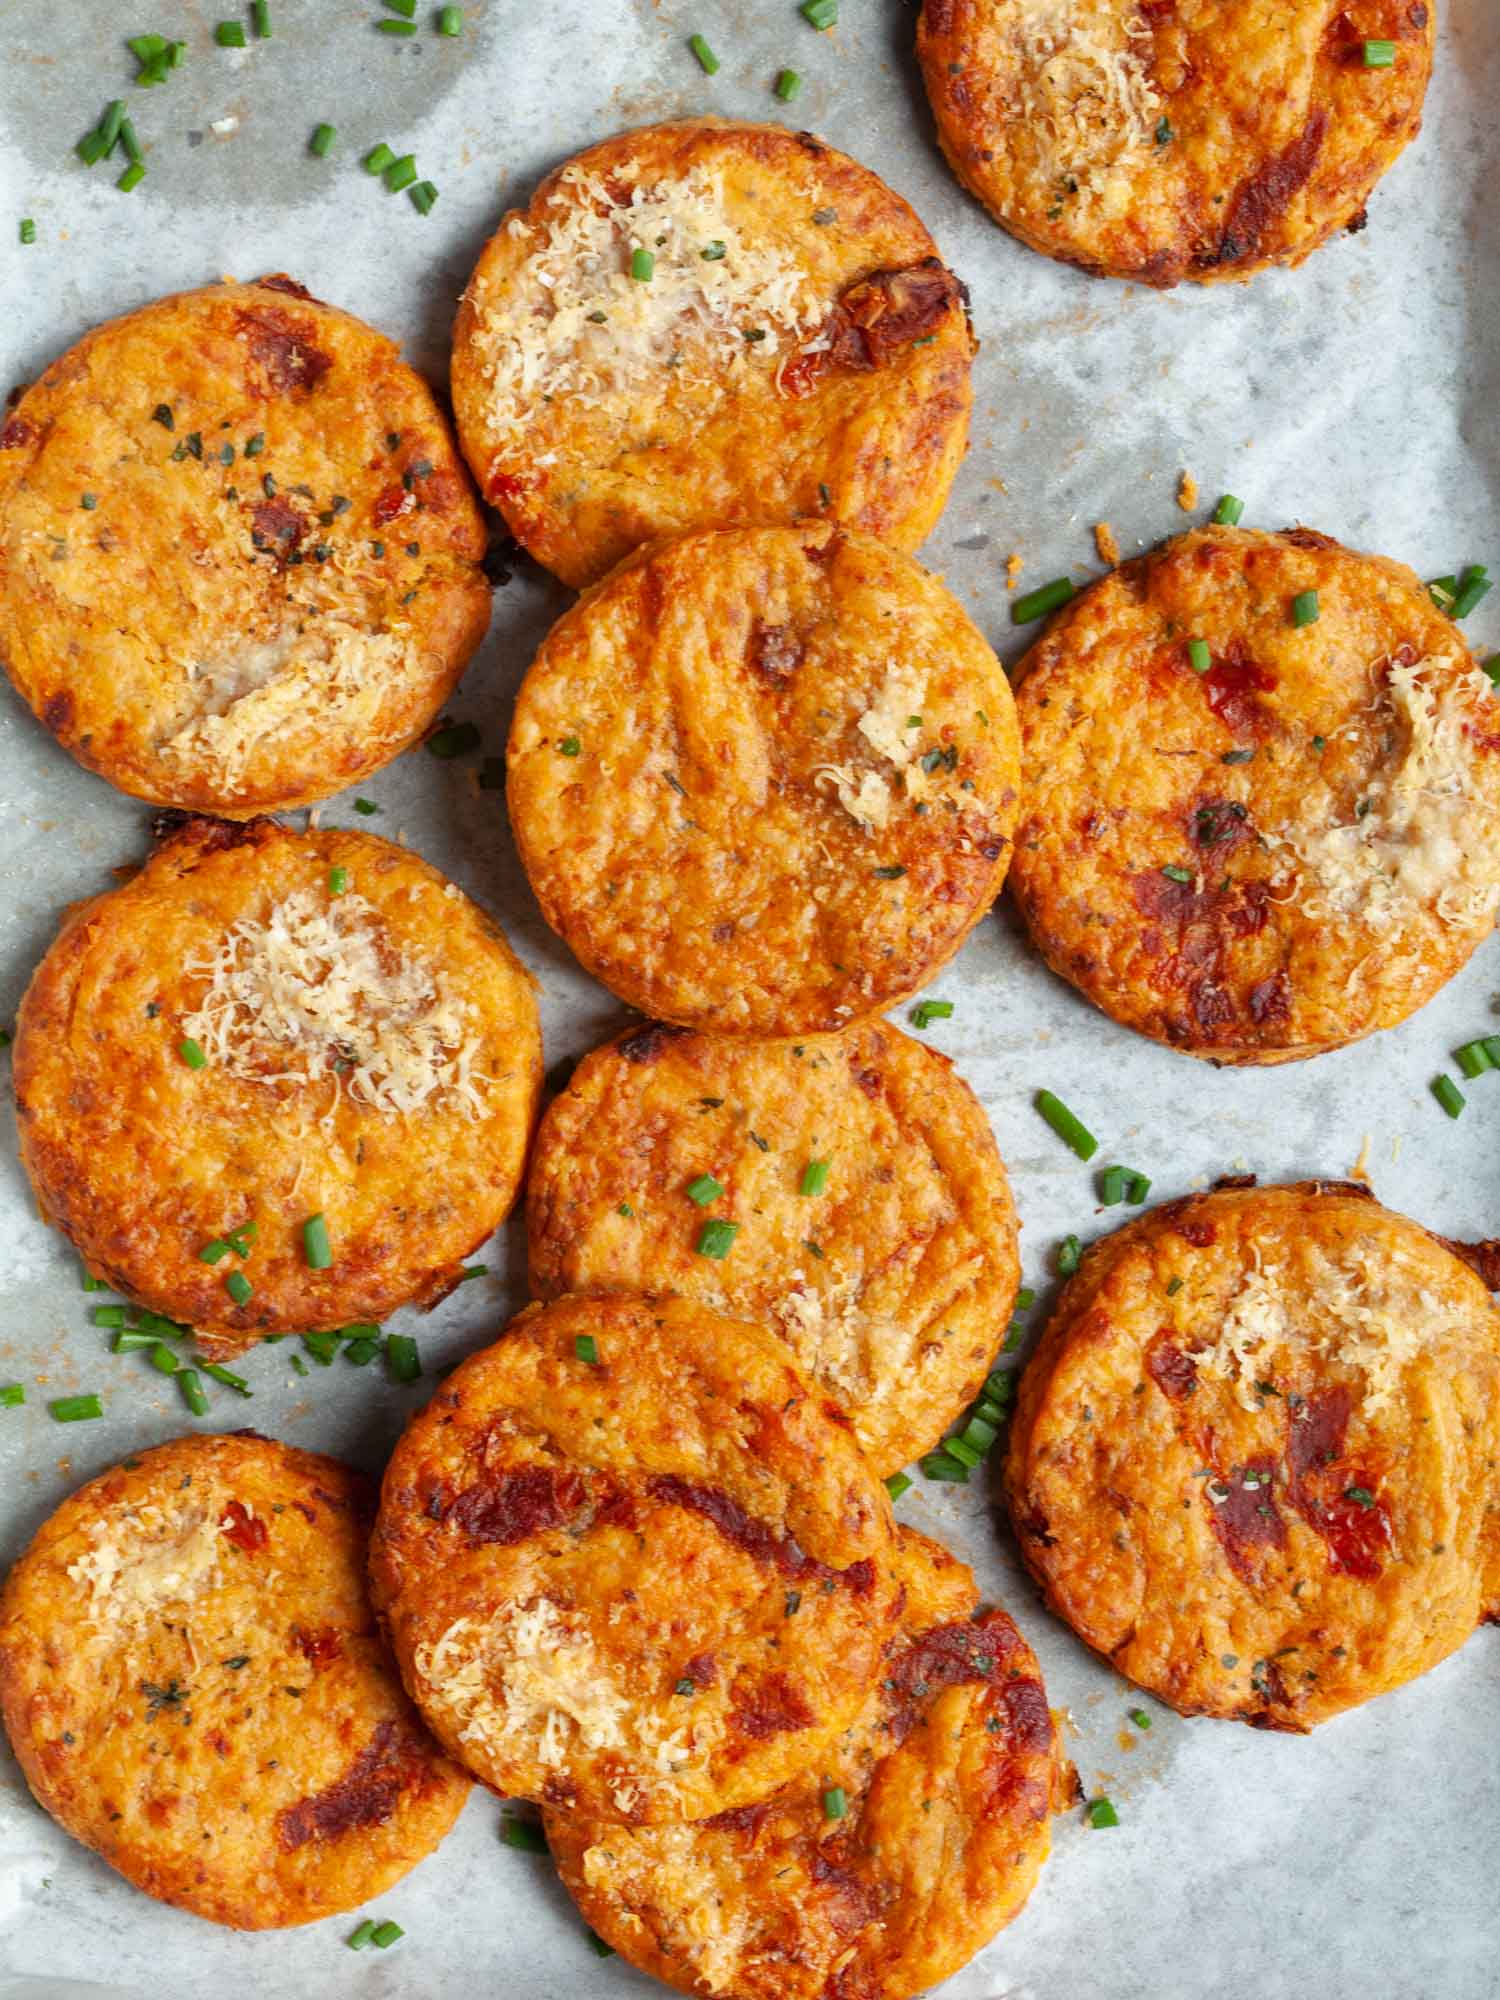 Cheese and tomato cookies